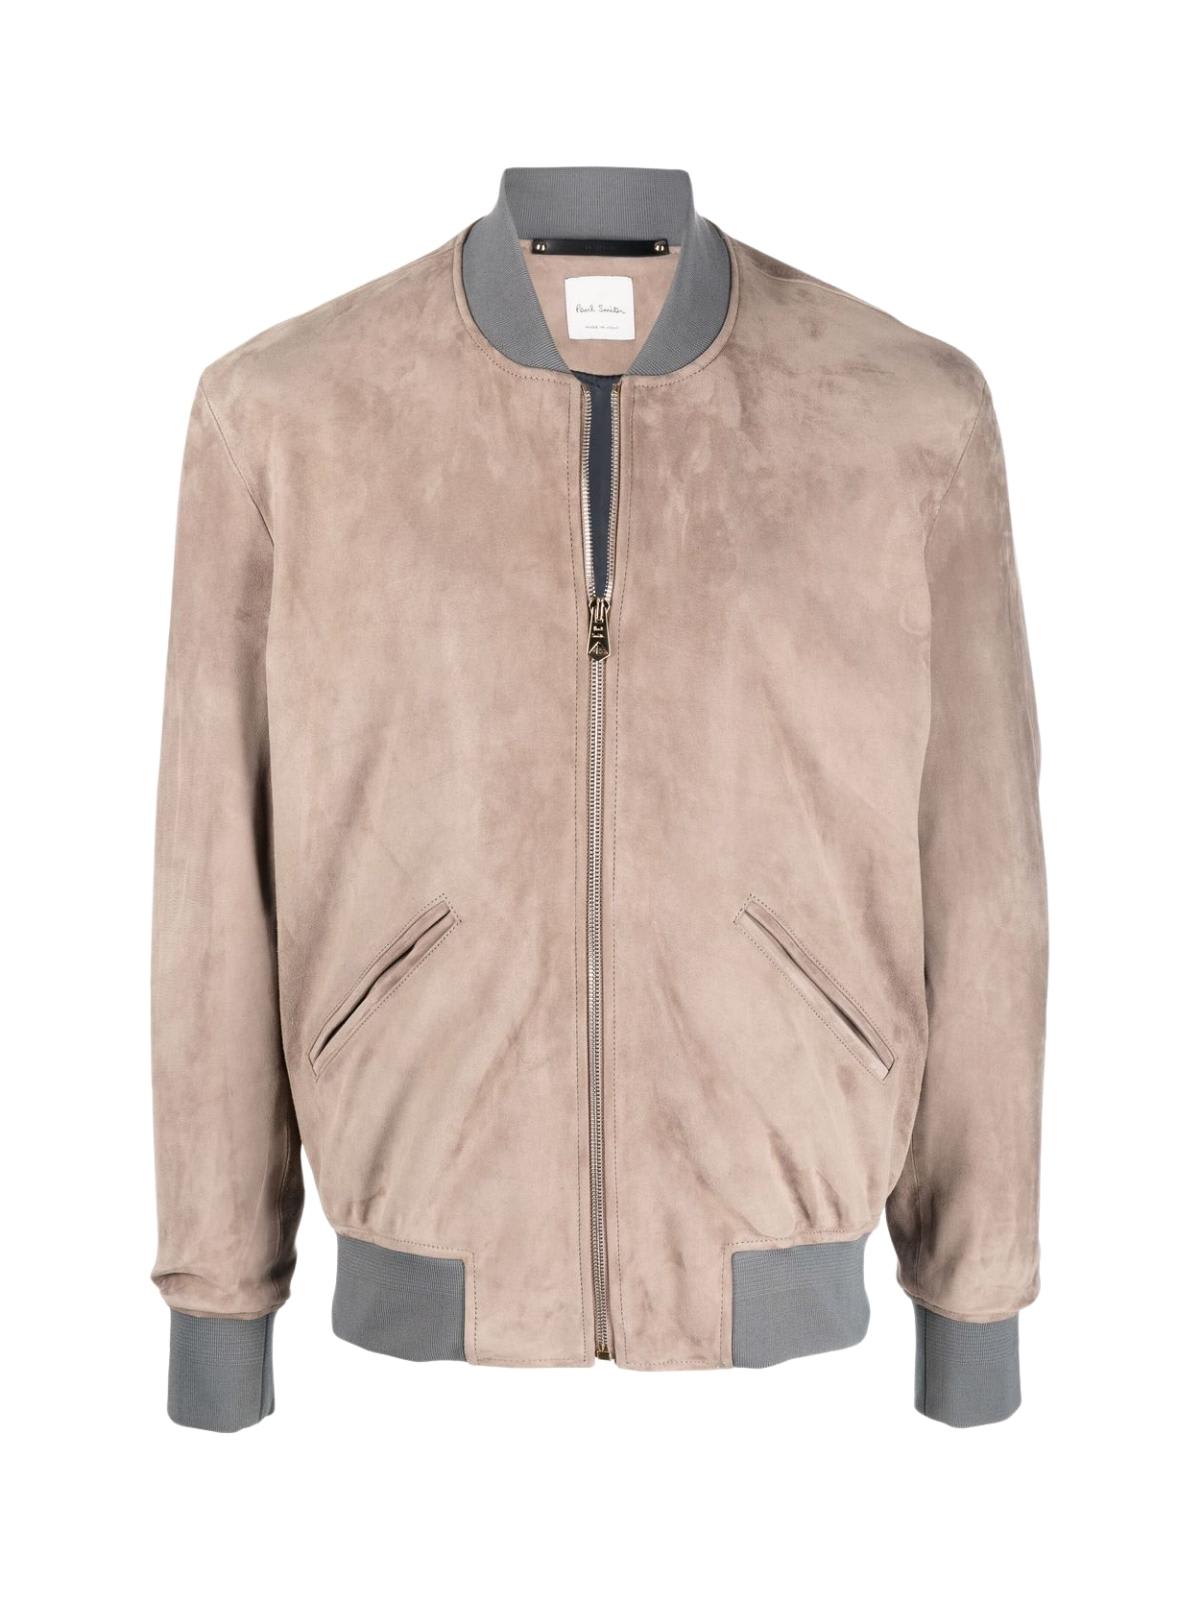 Paul Smith Gents Suede Bomber Jacket